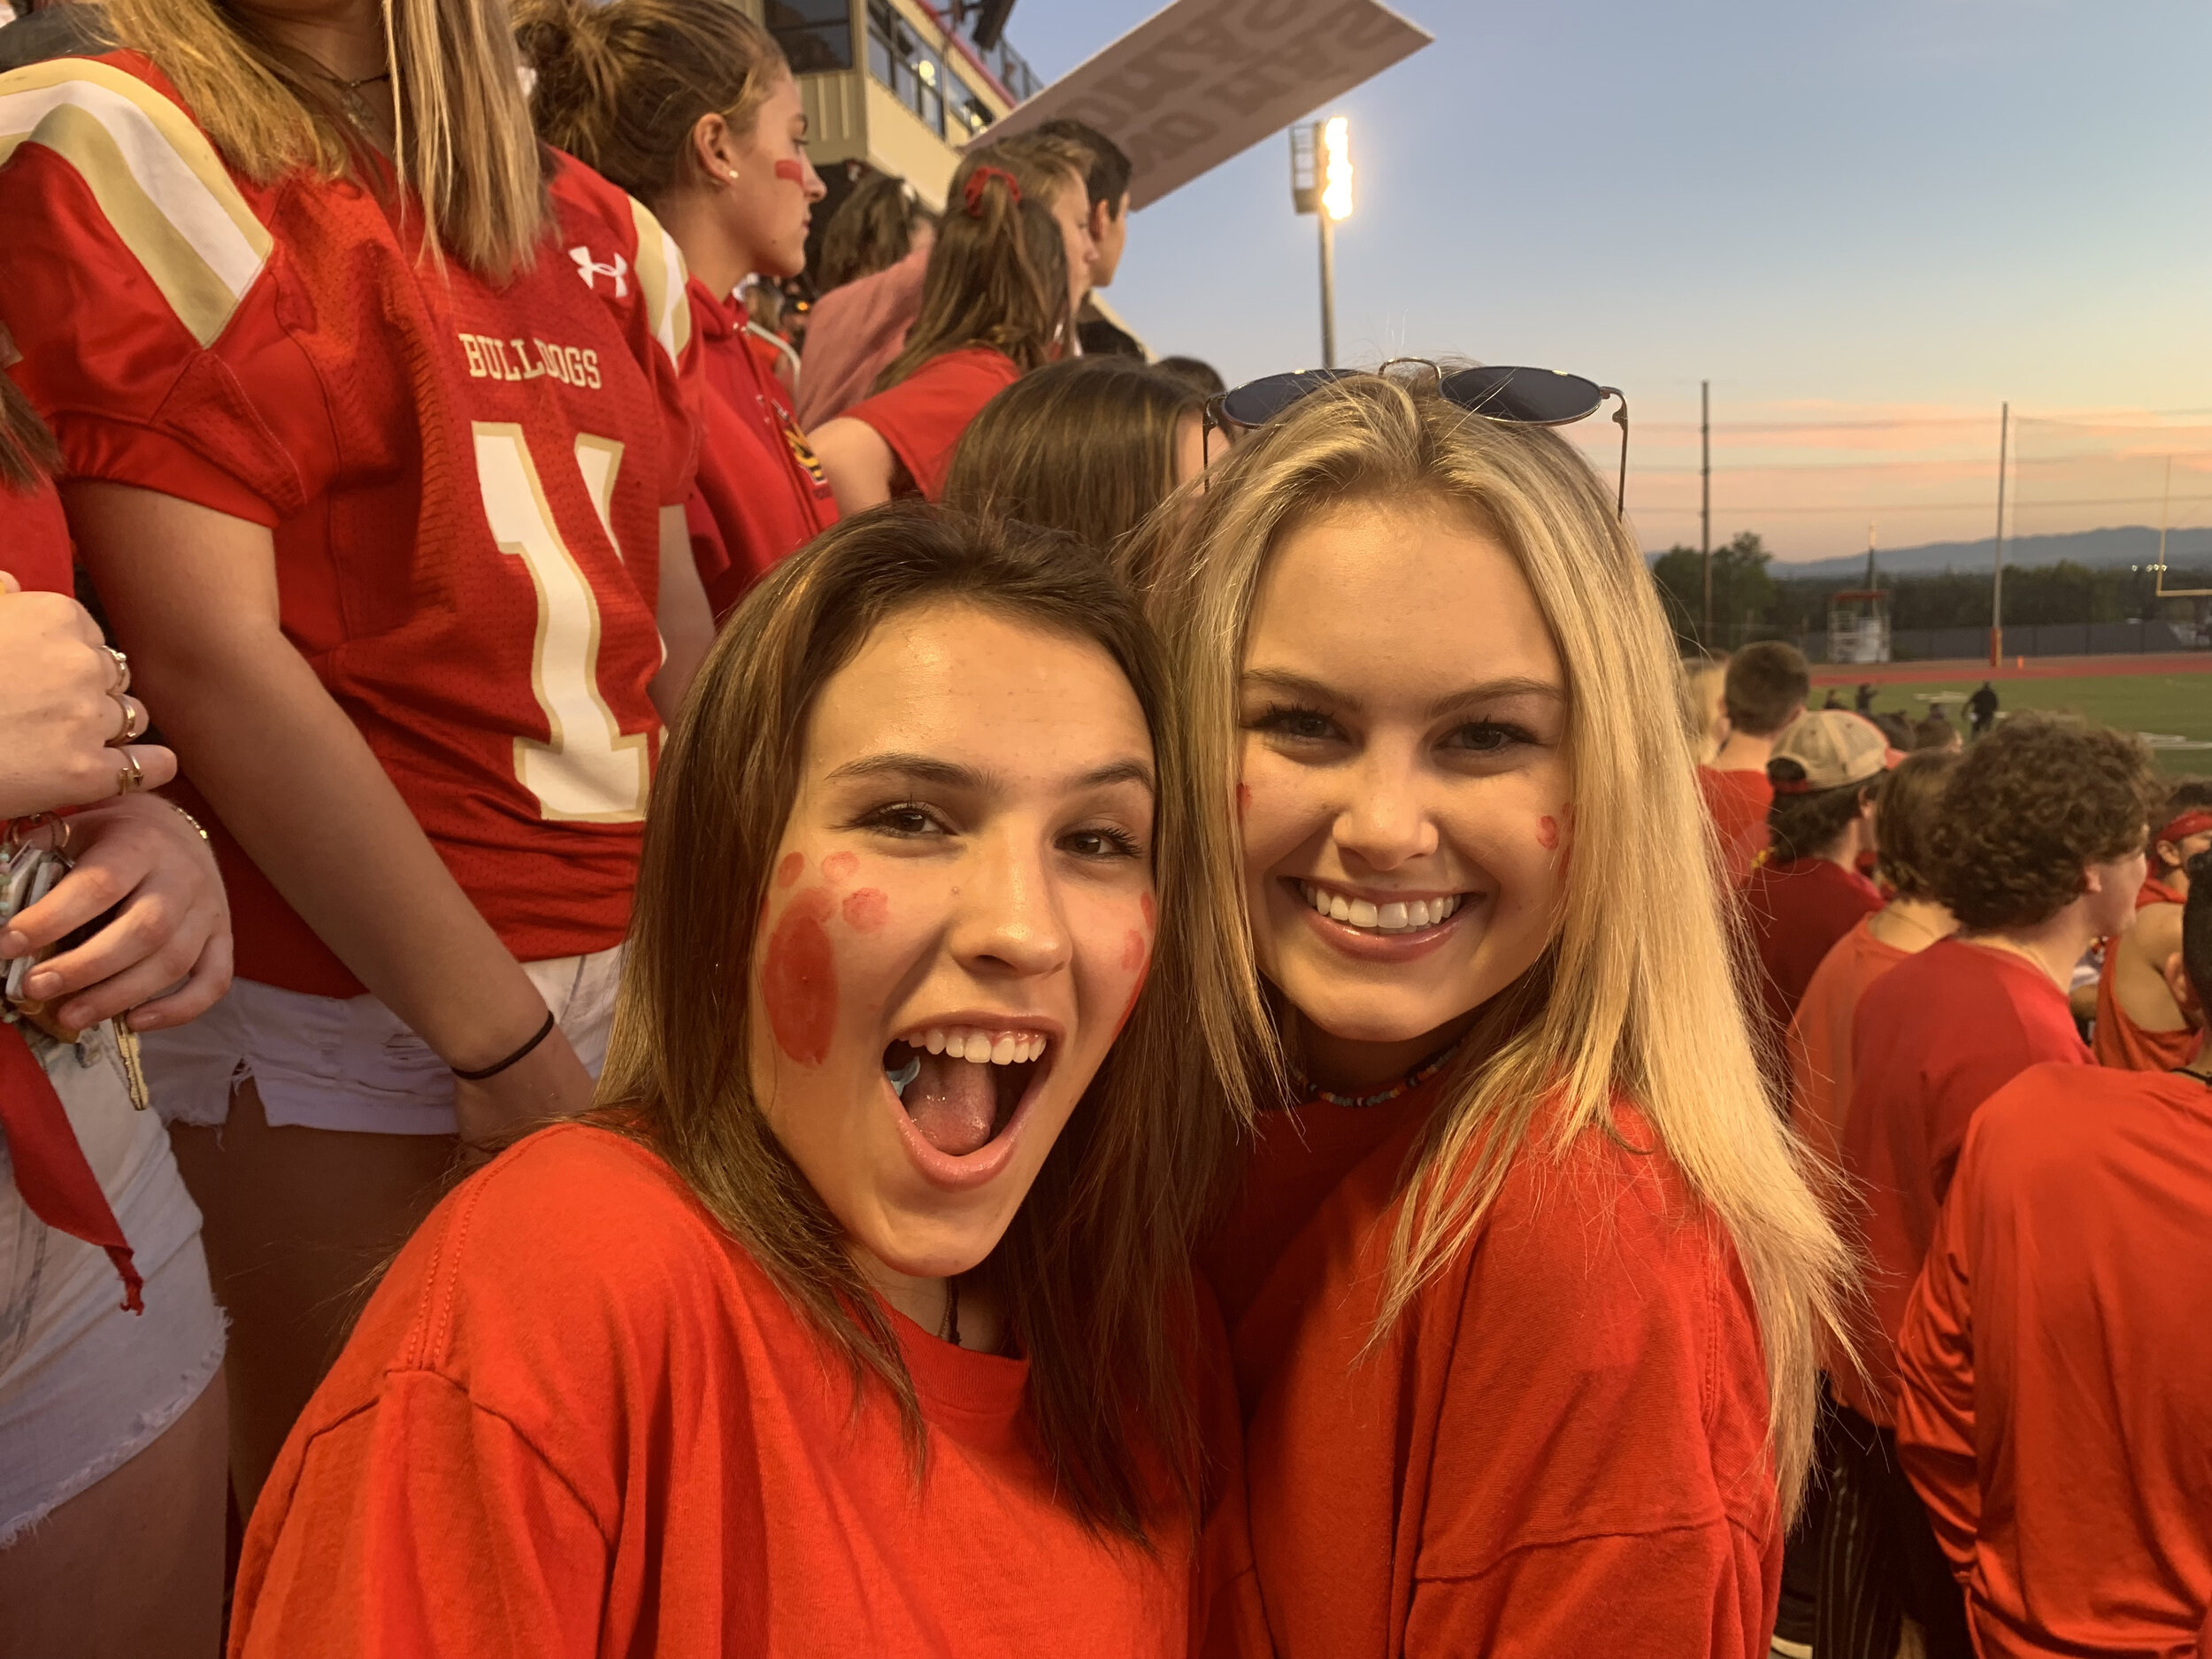 girls at football game by Lilly lyon.jpg